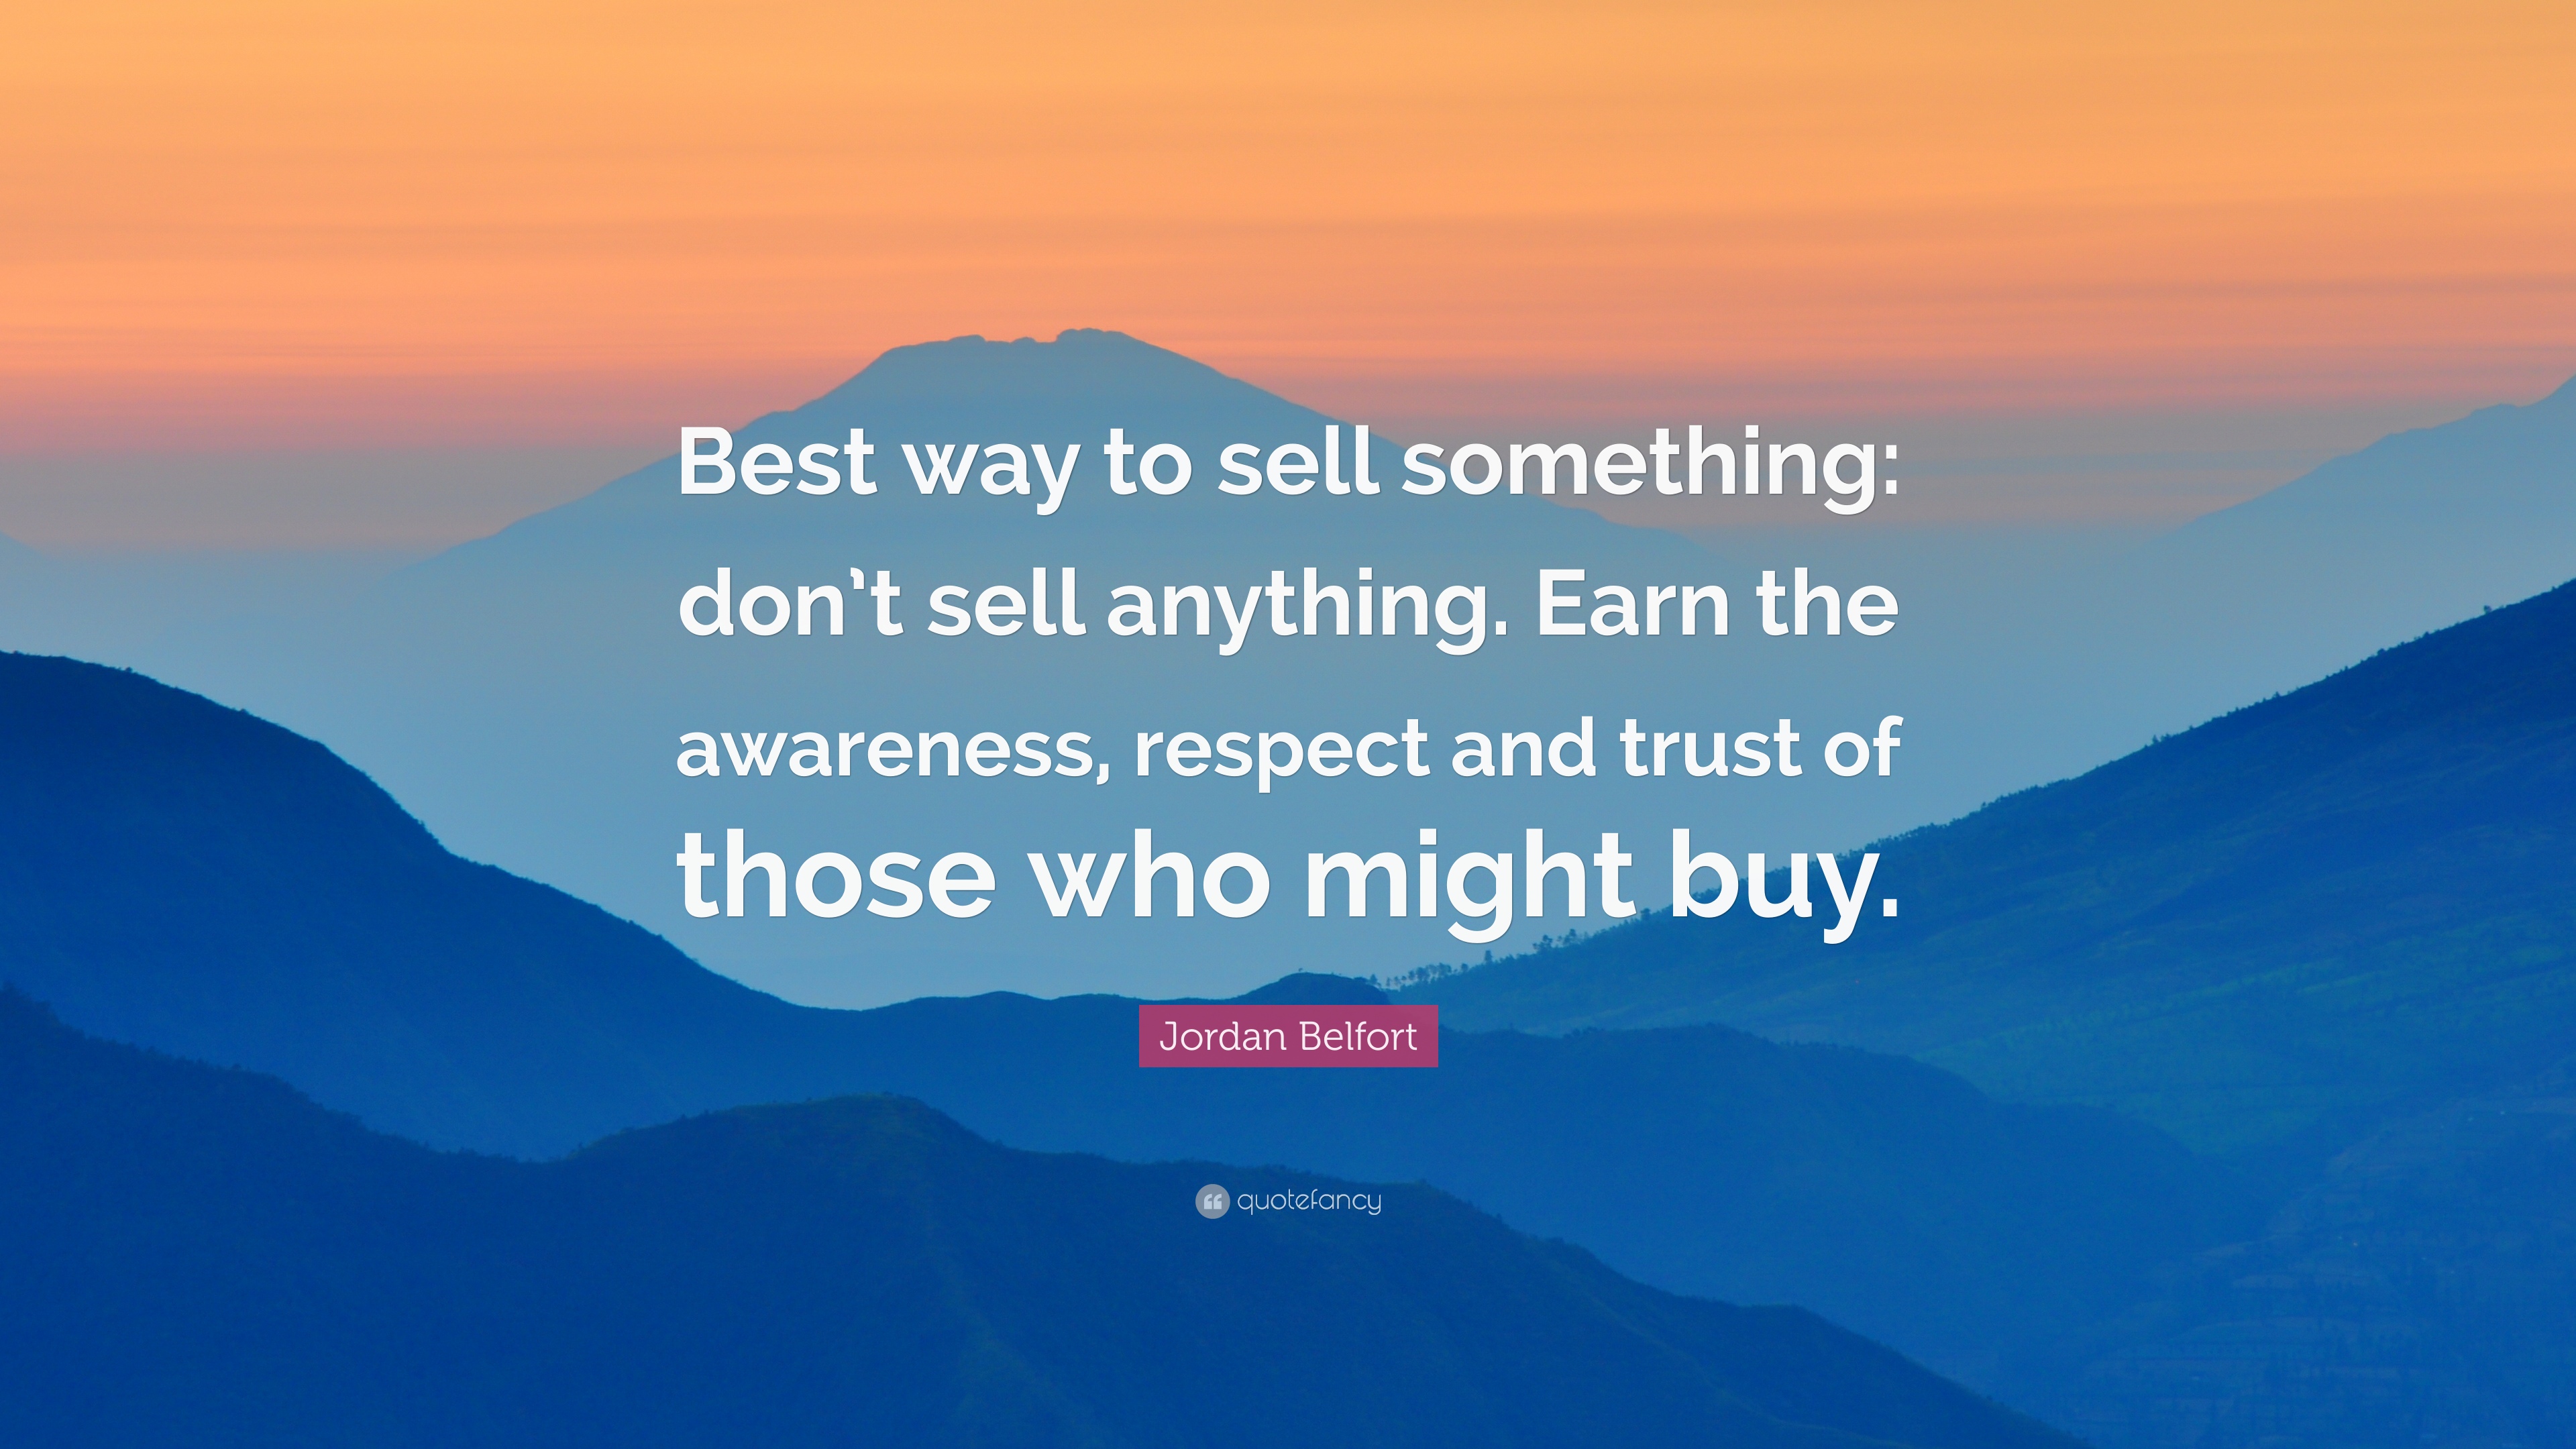 Jordan Belfort Quote: “Best way to sell something: don't sell anything. Earn the awareness, respect